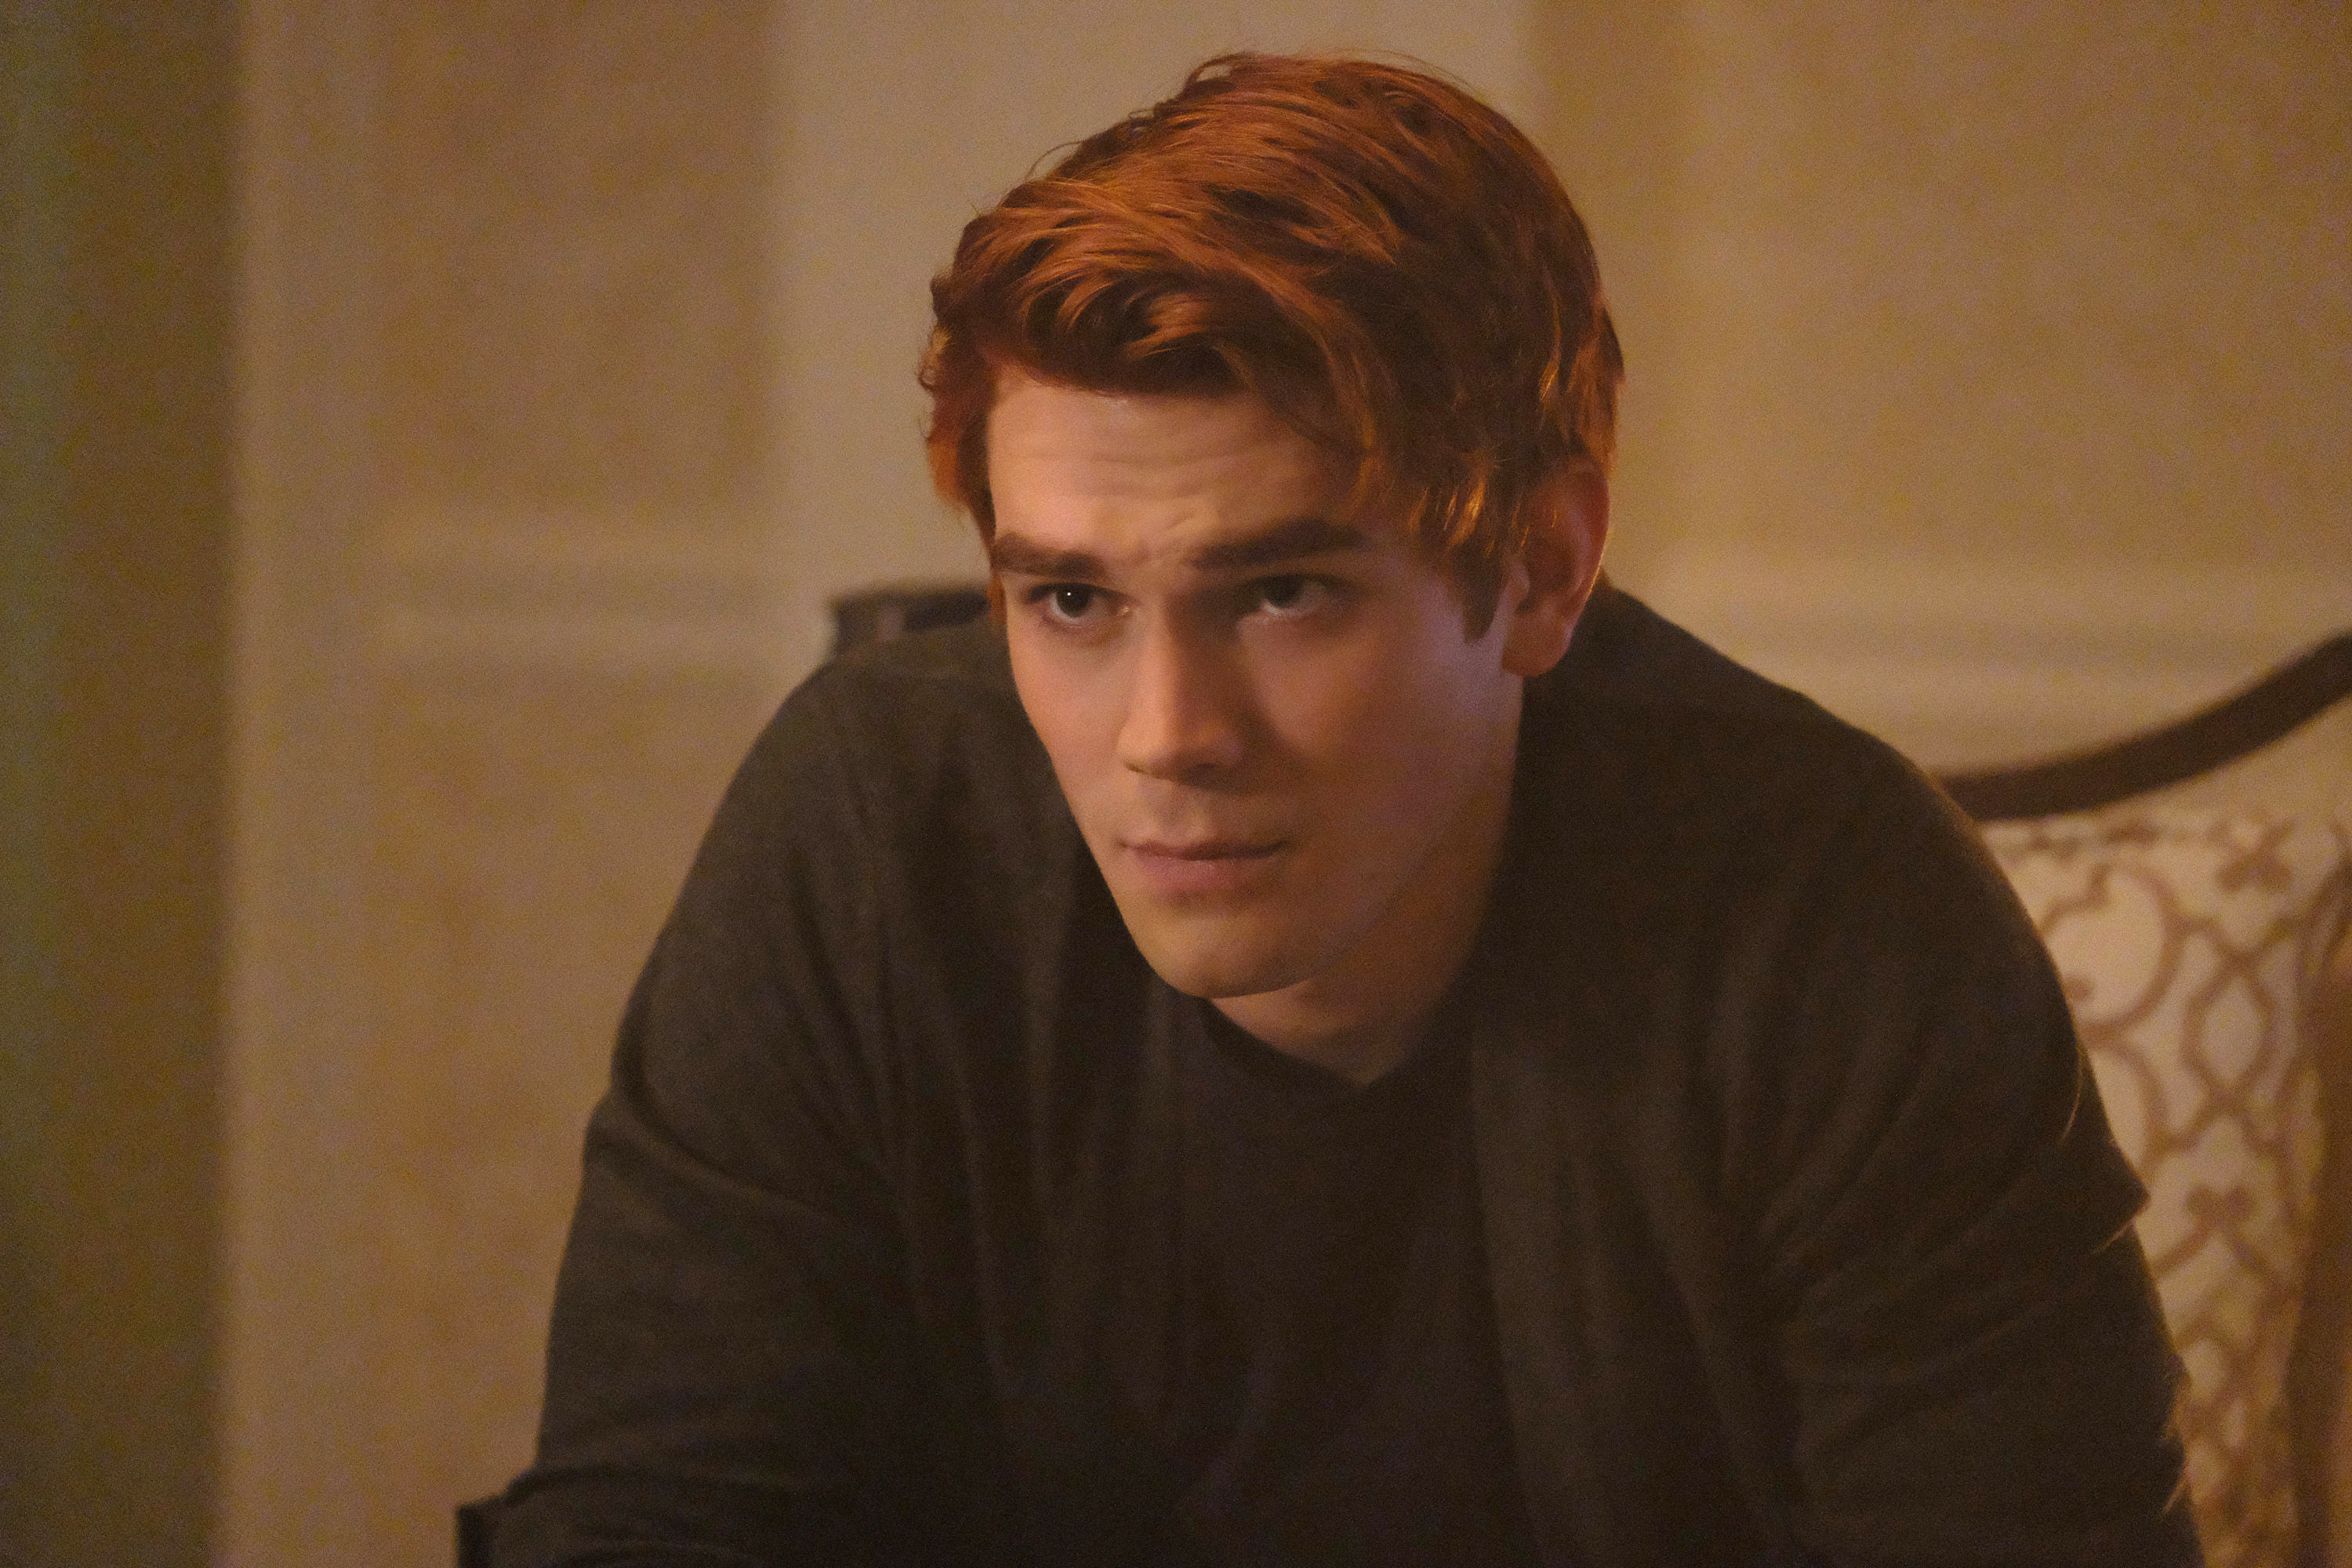 KJ Apa stares intently as Archie Andrews on &quot;Riverdale&quot;